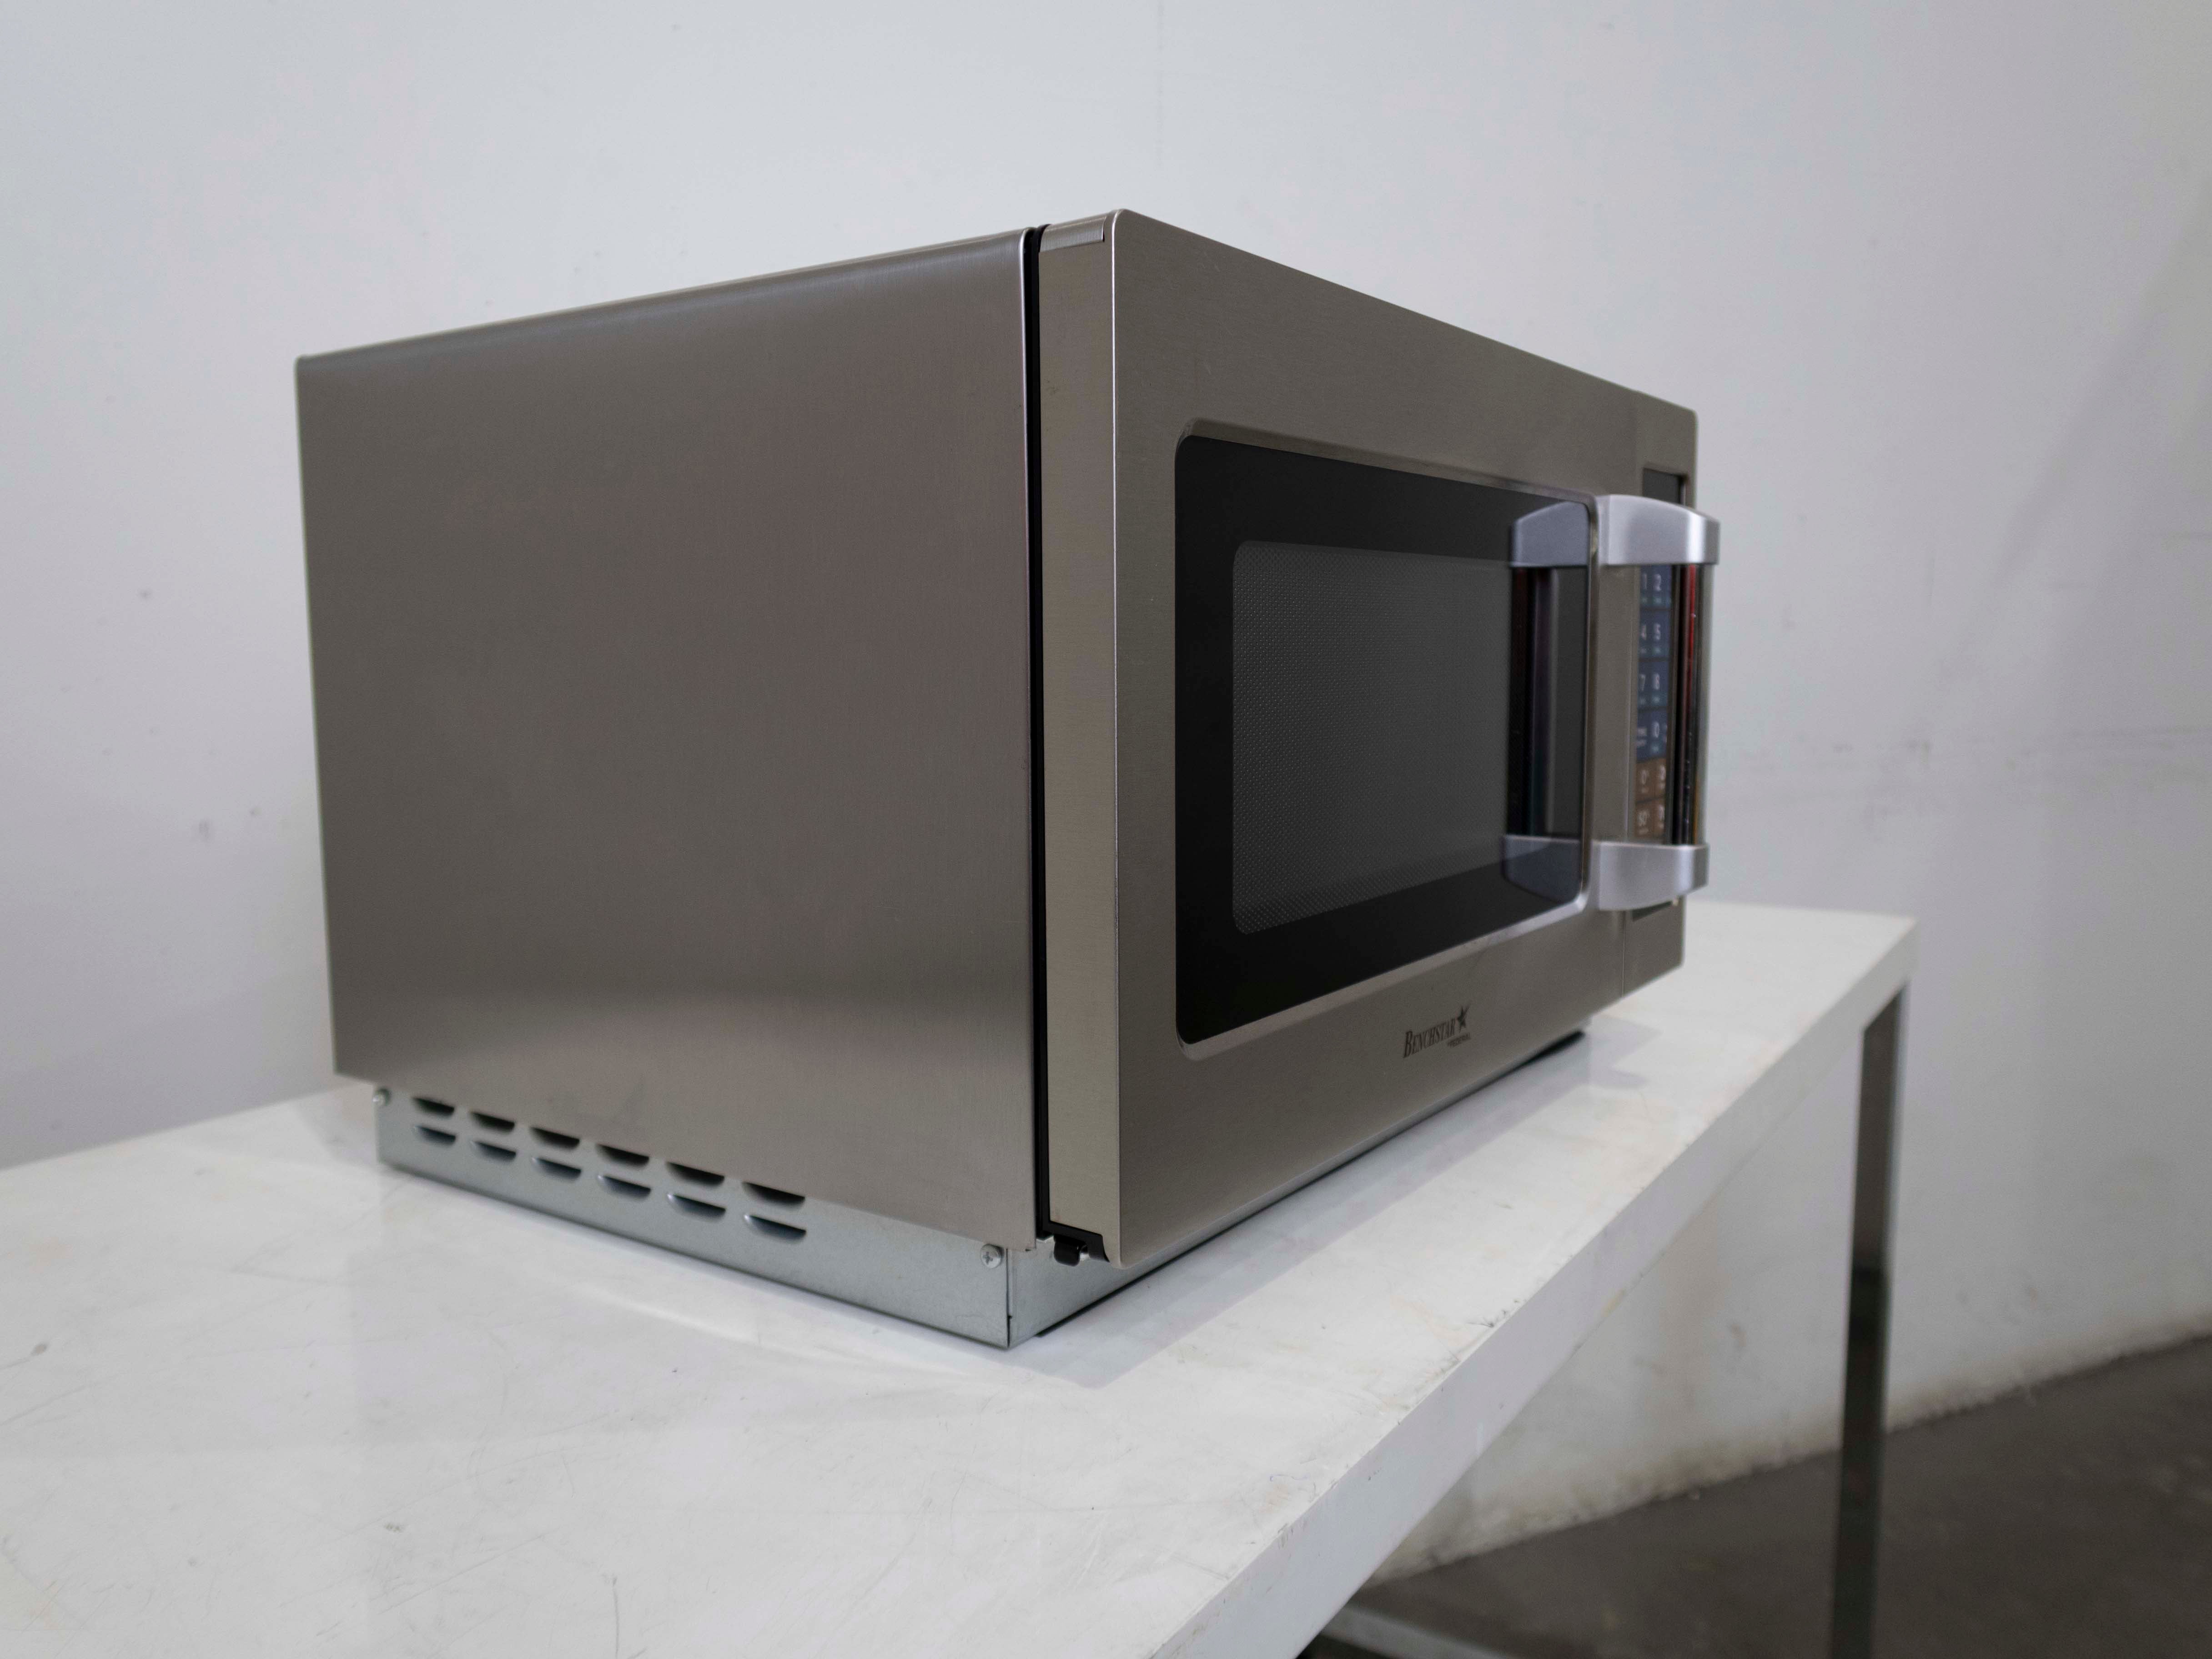 Thumbnail - Benchstar MD-1400 Microwave Oven